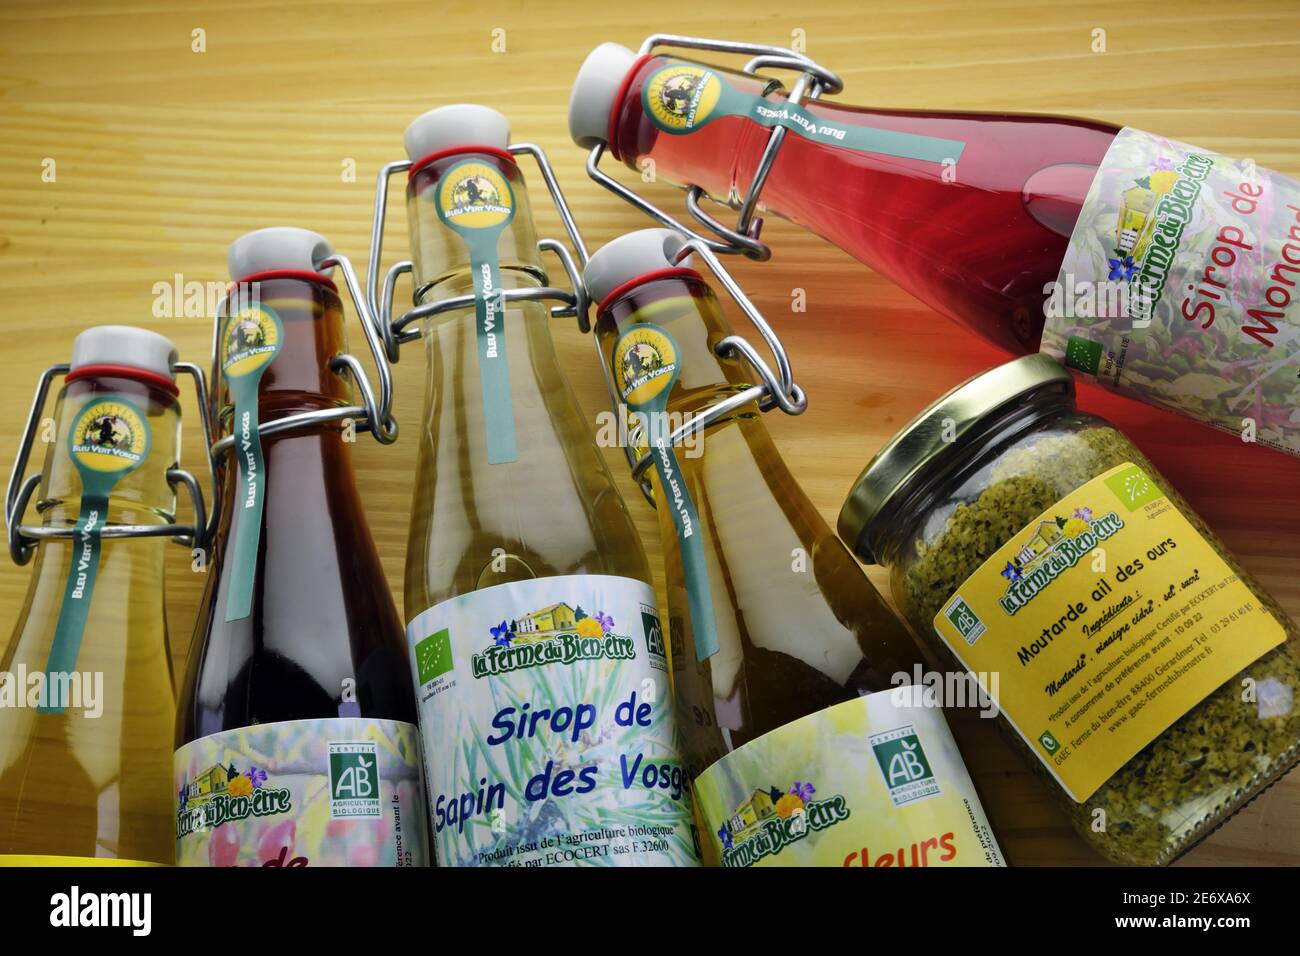 France, Vosges, Gerardmer, Le Beillard, la Ferme du Bien Etre, farmers, producers and processors of aromatic, medicinal and perfume plants, AB label, bottles of syrup, jar of mustard Bear garlic Stock Photo